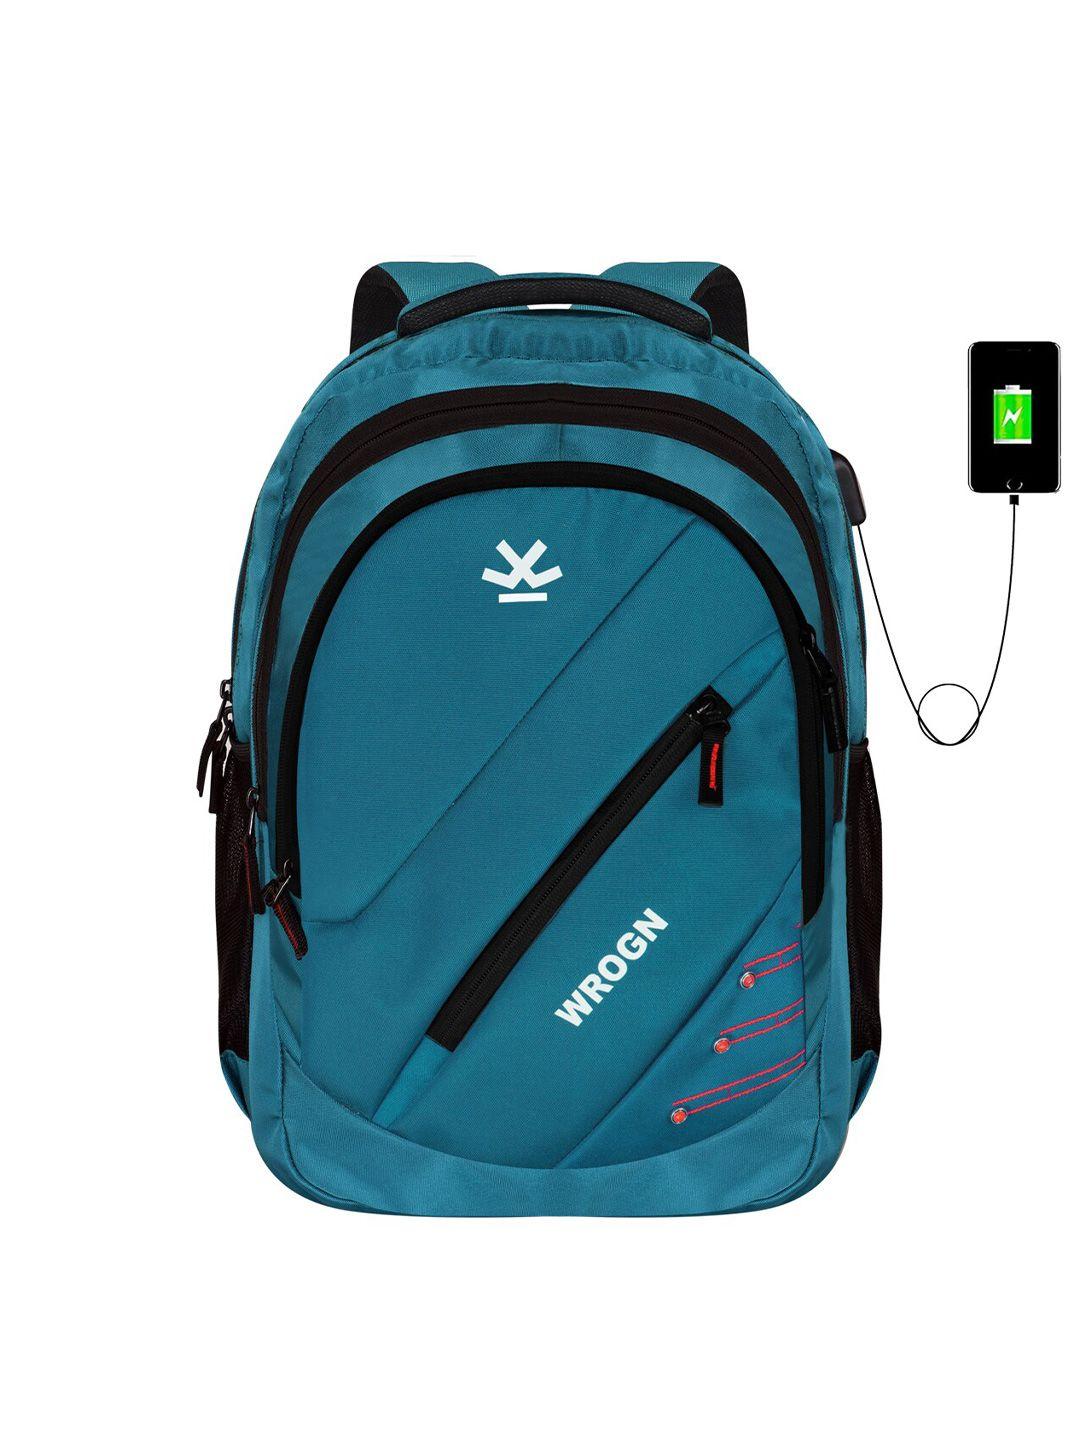 wrogn brand logo backpack with usb charging port & rain cover